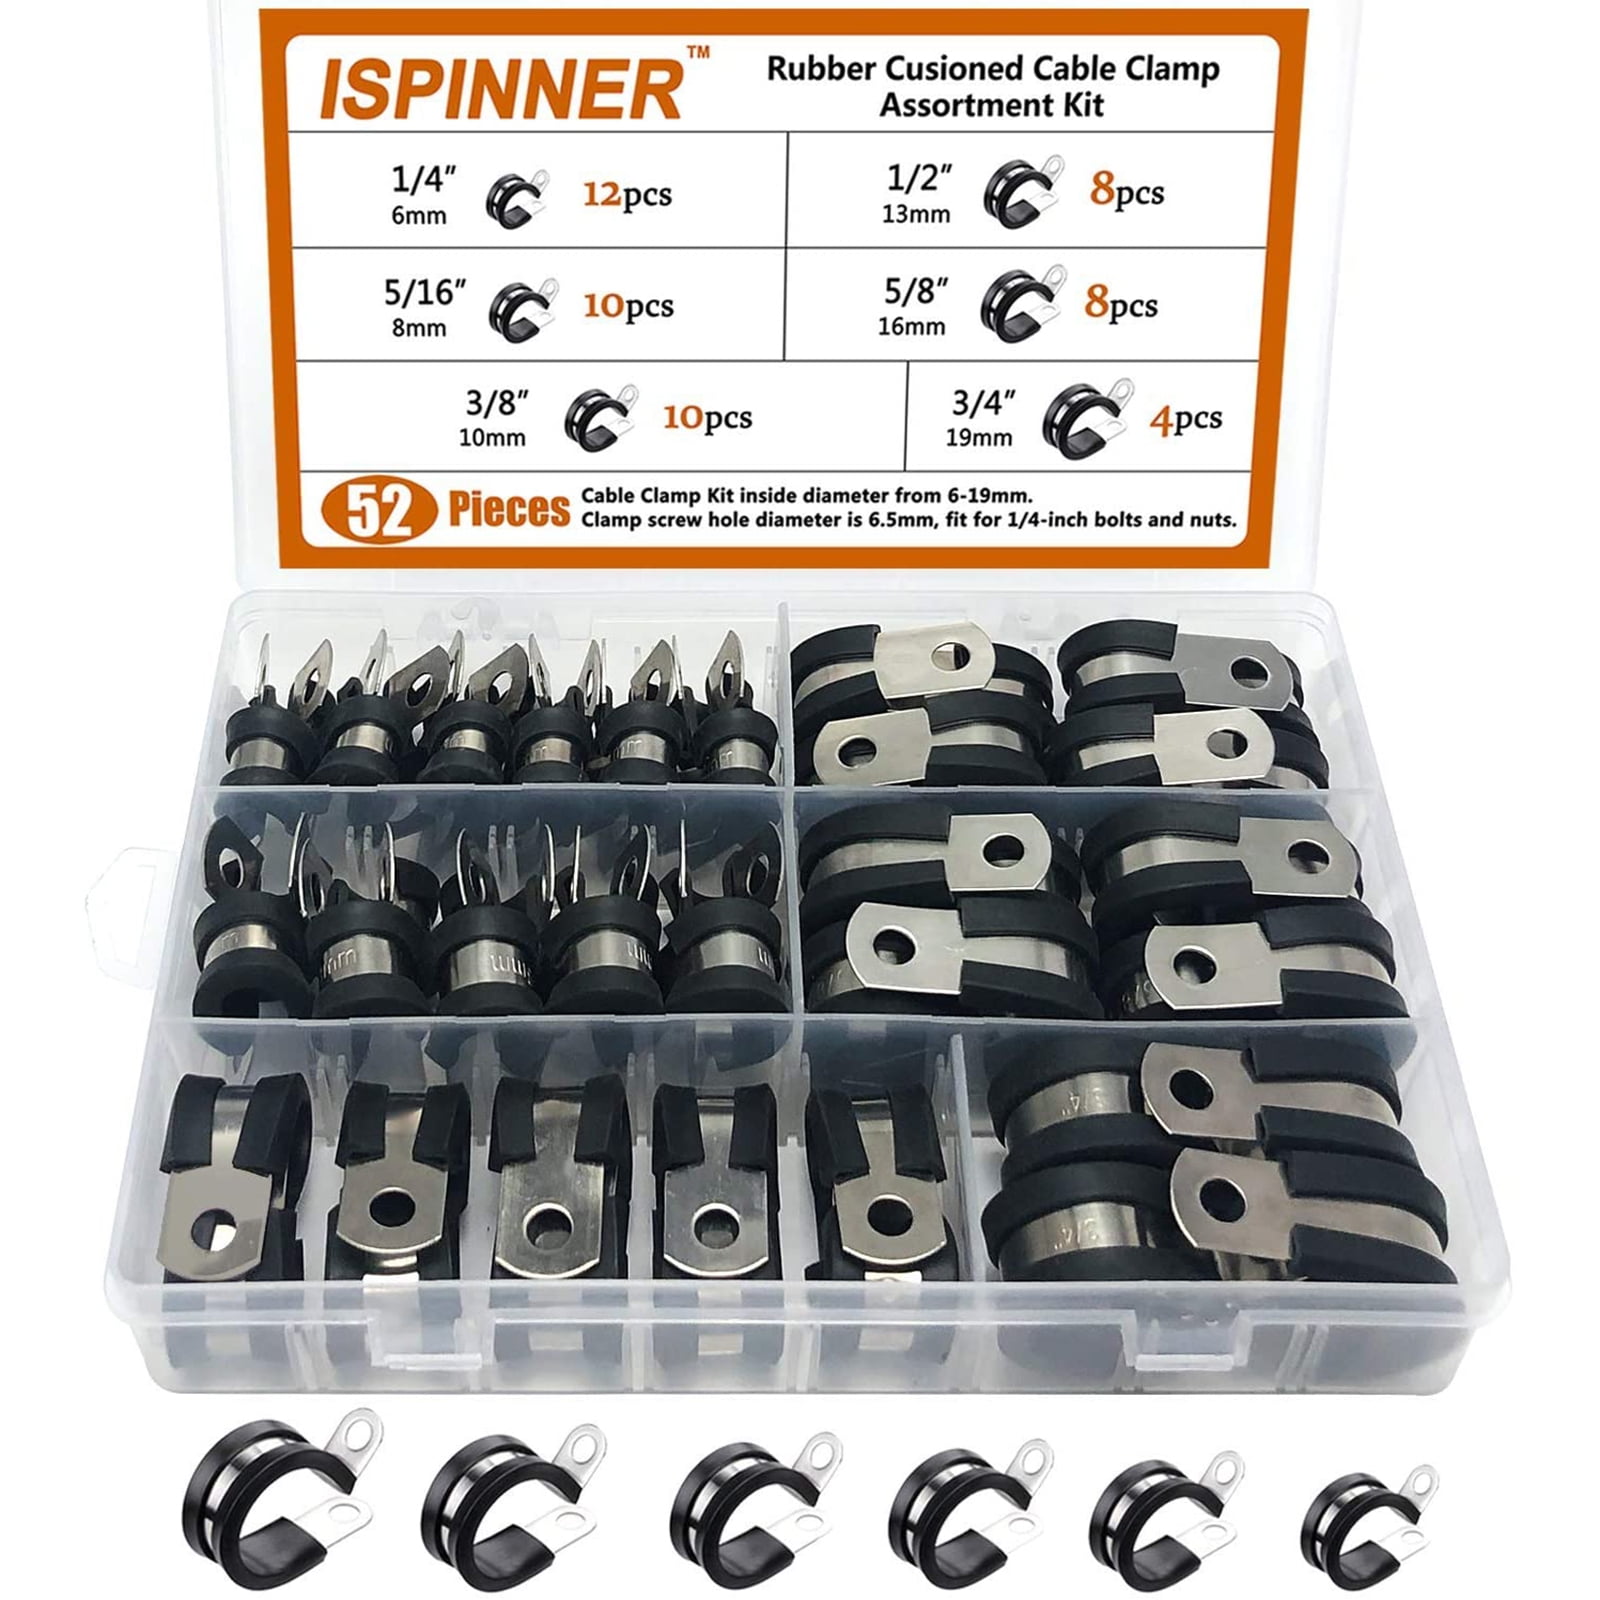 46pcs Stainless Steel Rubber Cushion Insulated Clamp Cable Clamps Assortment Kit 